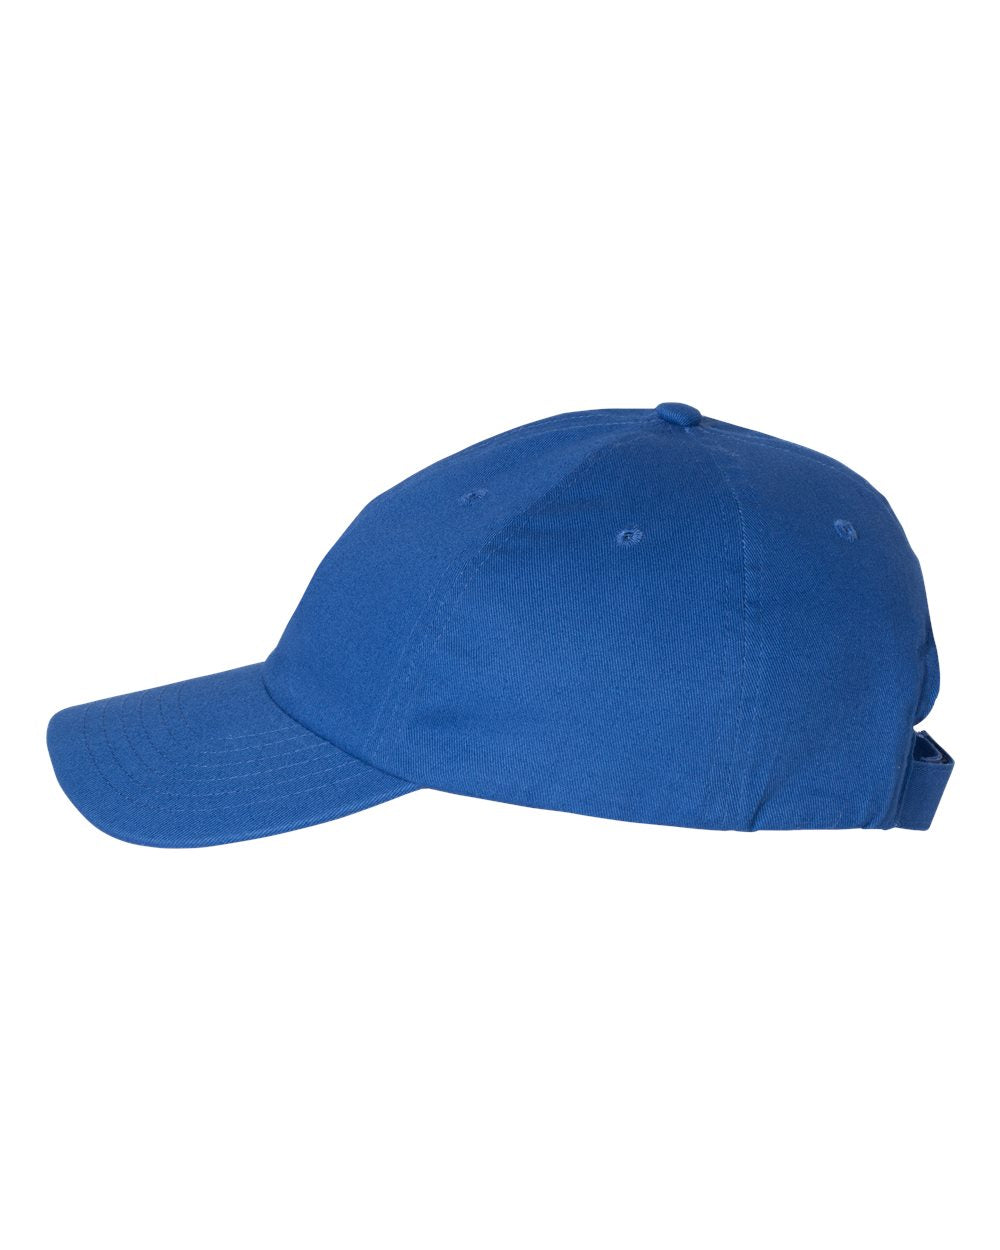 Adult Brushed Twill Cap, Royal